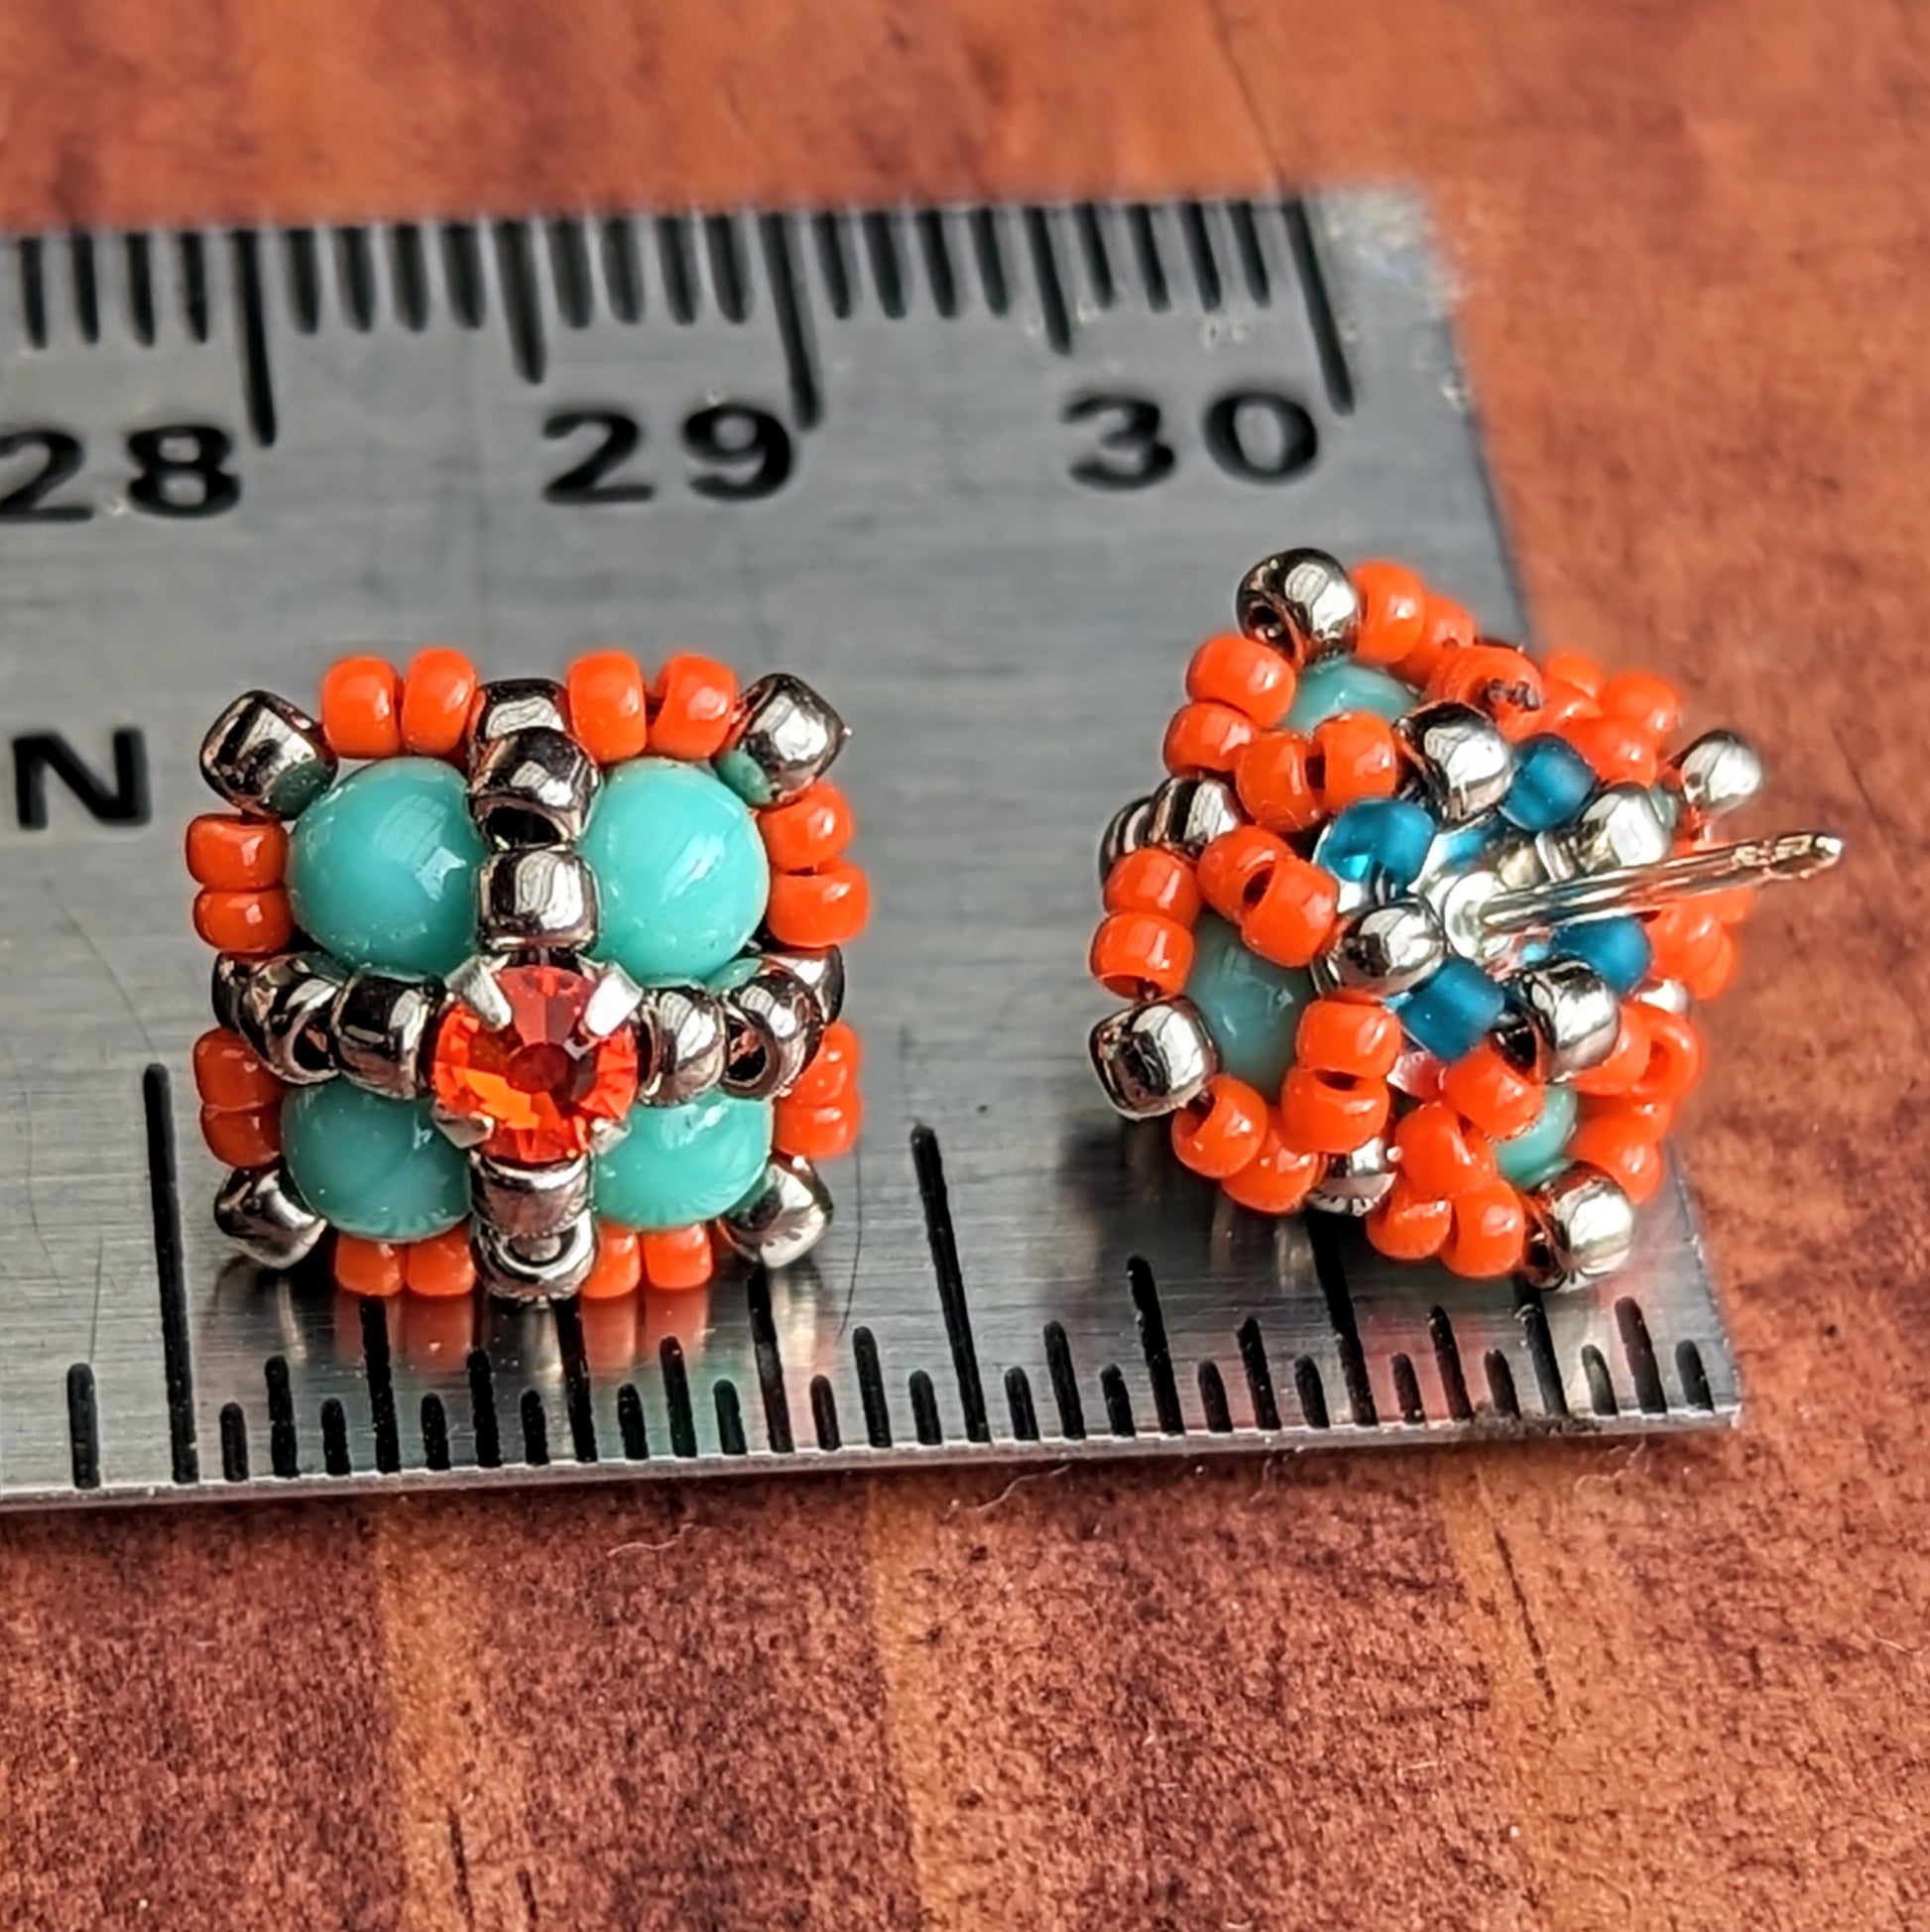 A pair of square stud earrings resting on a metal ruler to show that they are a little less than a half inch across. One stud is positioned to show the back, which has a net of small beads holding the finding in place. The forward facing earring is formed from four turquoise beads with an orange rhinestone. The rhinestone is held in place by an x-shape of silver seed beads. The outside of the earrings is outlined in orange seed beads. 